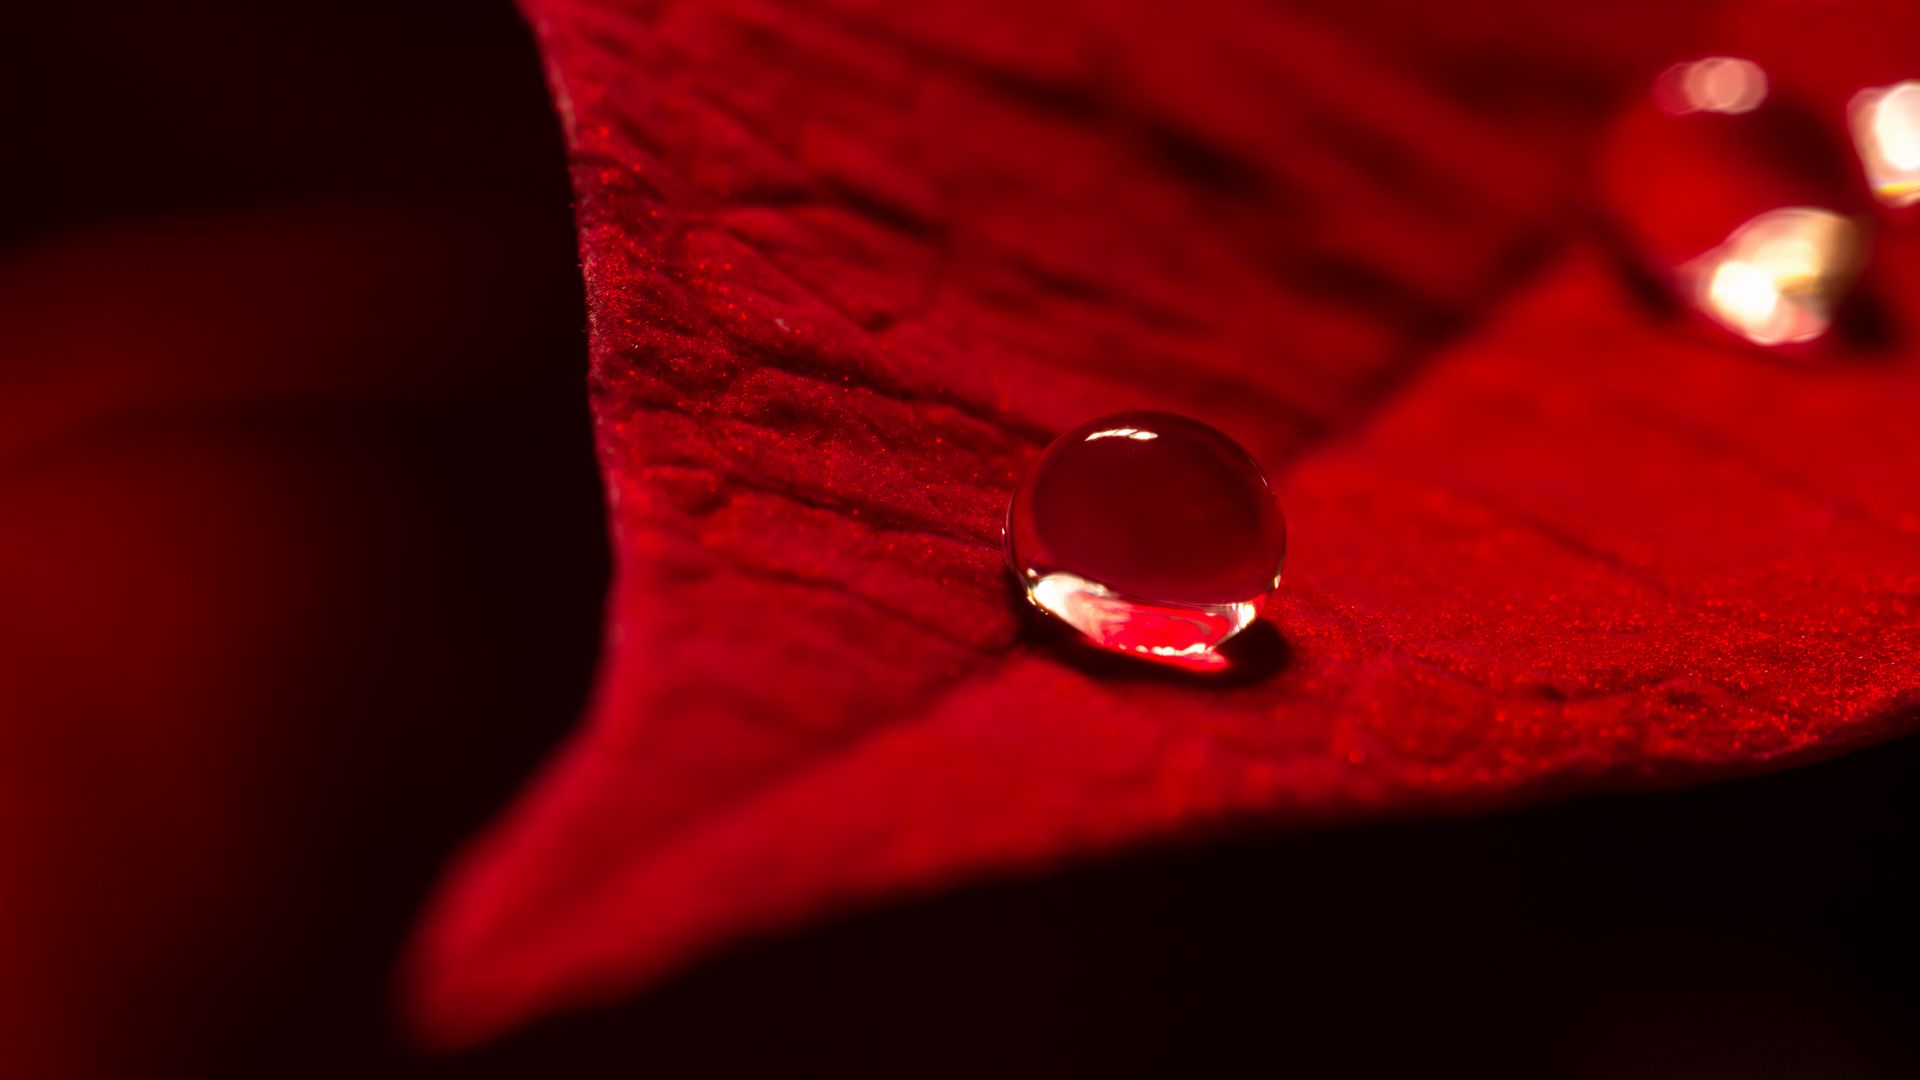 Download wallpaper 1920x1080 drop, water, leaf, macro, red full hd, hdtv,  fhd, 1080p hd background